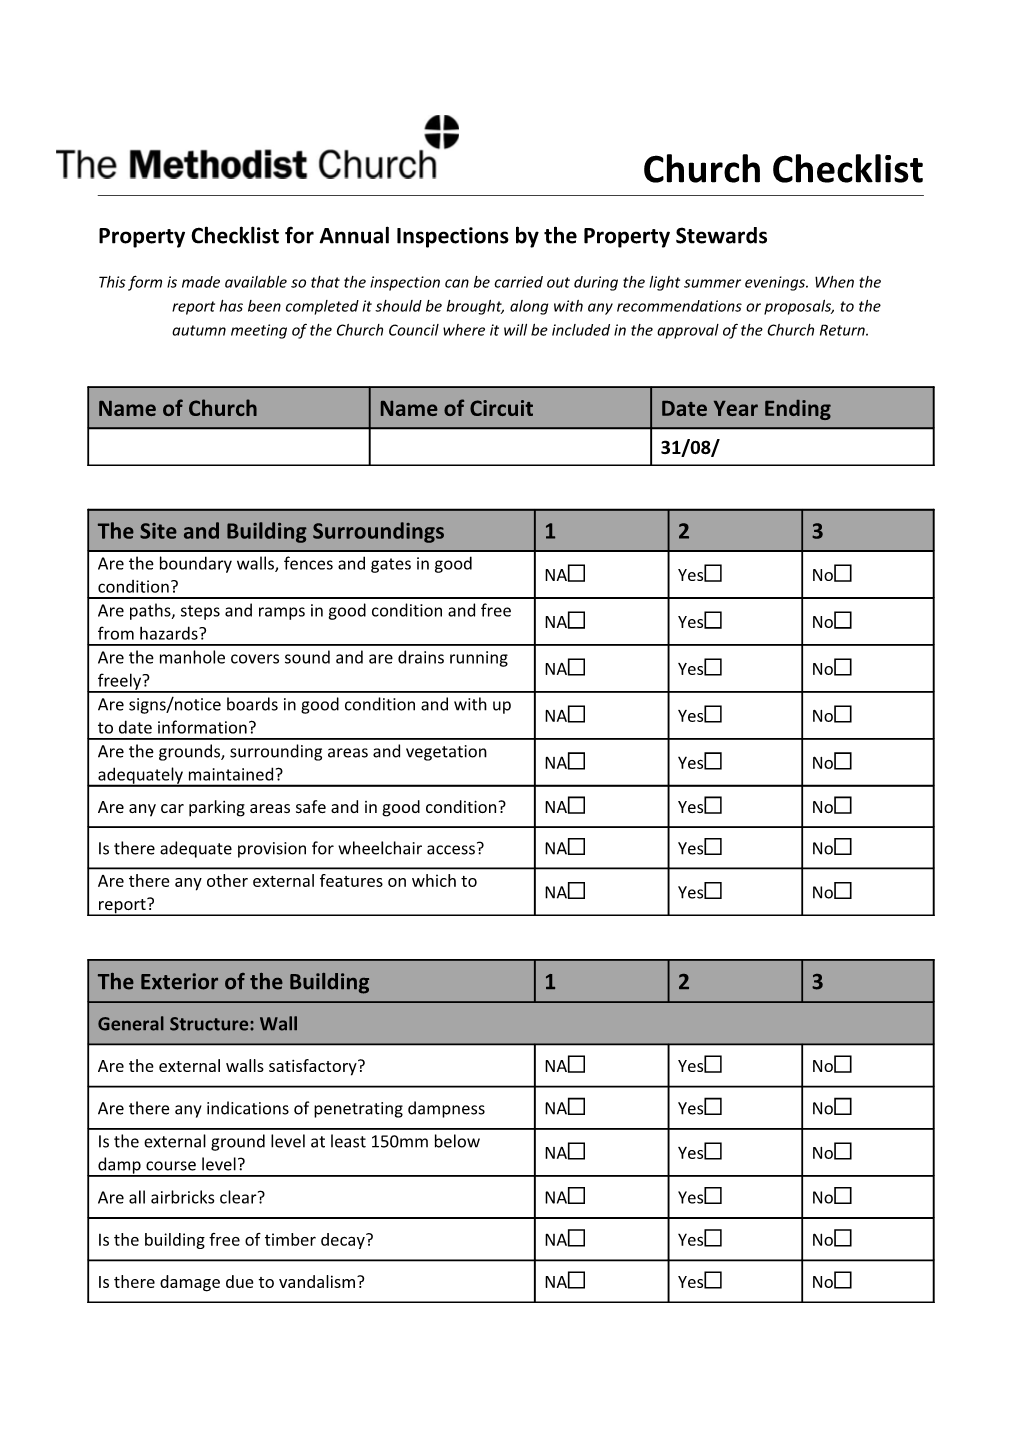 Property Checklist for Annual Inspections by the Property Stewards